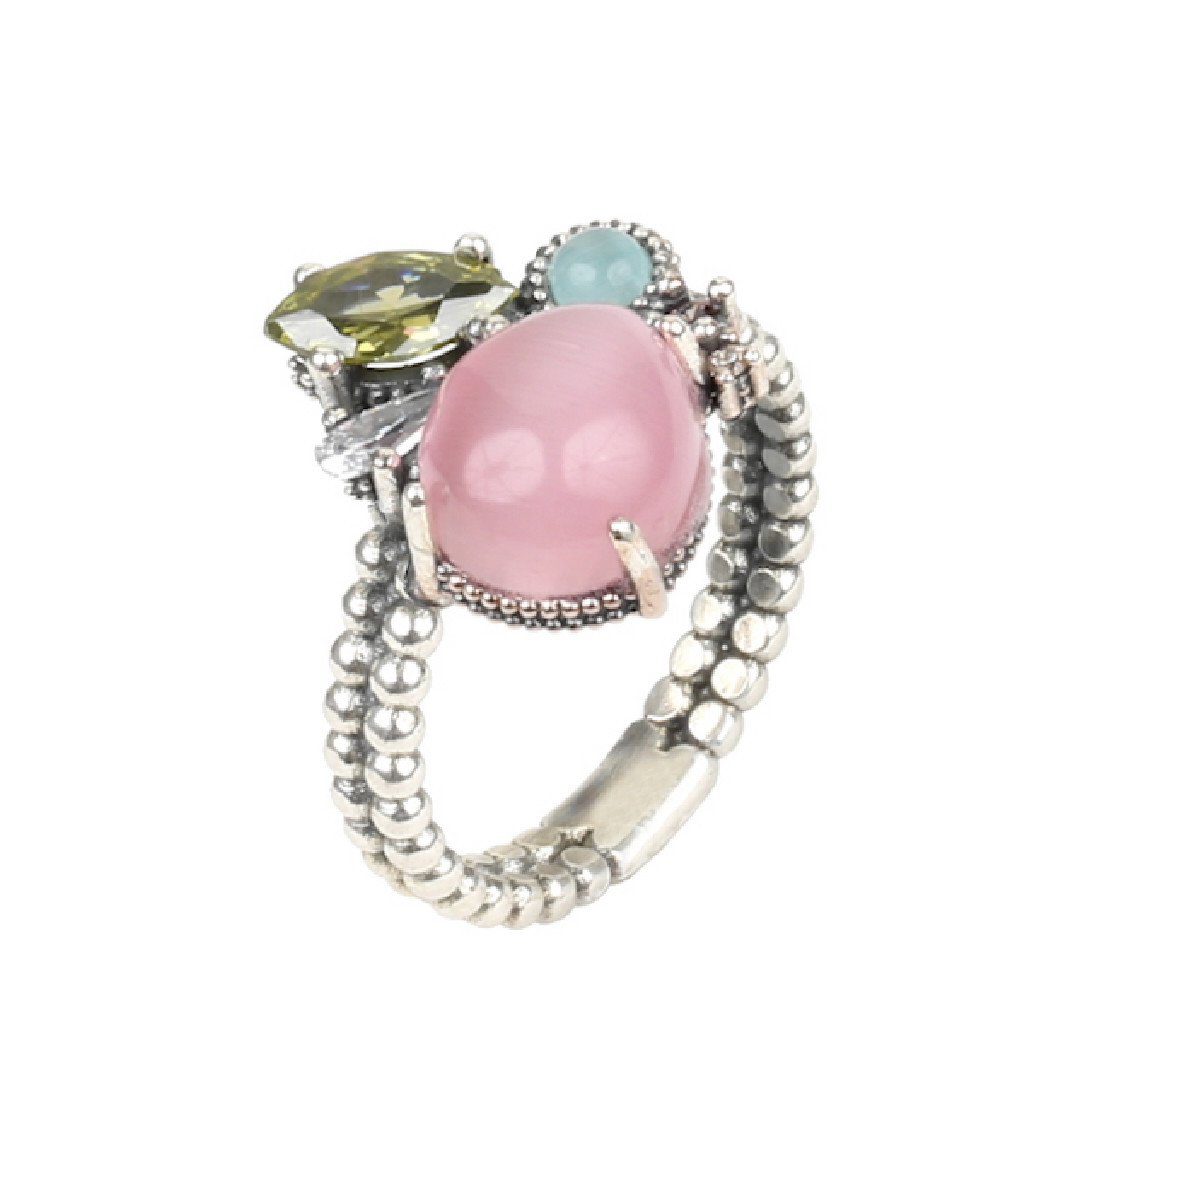 PINK SUNFIELD RING - AN064493